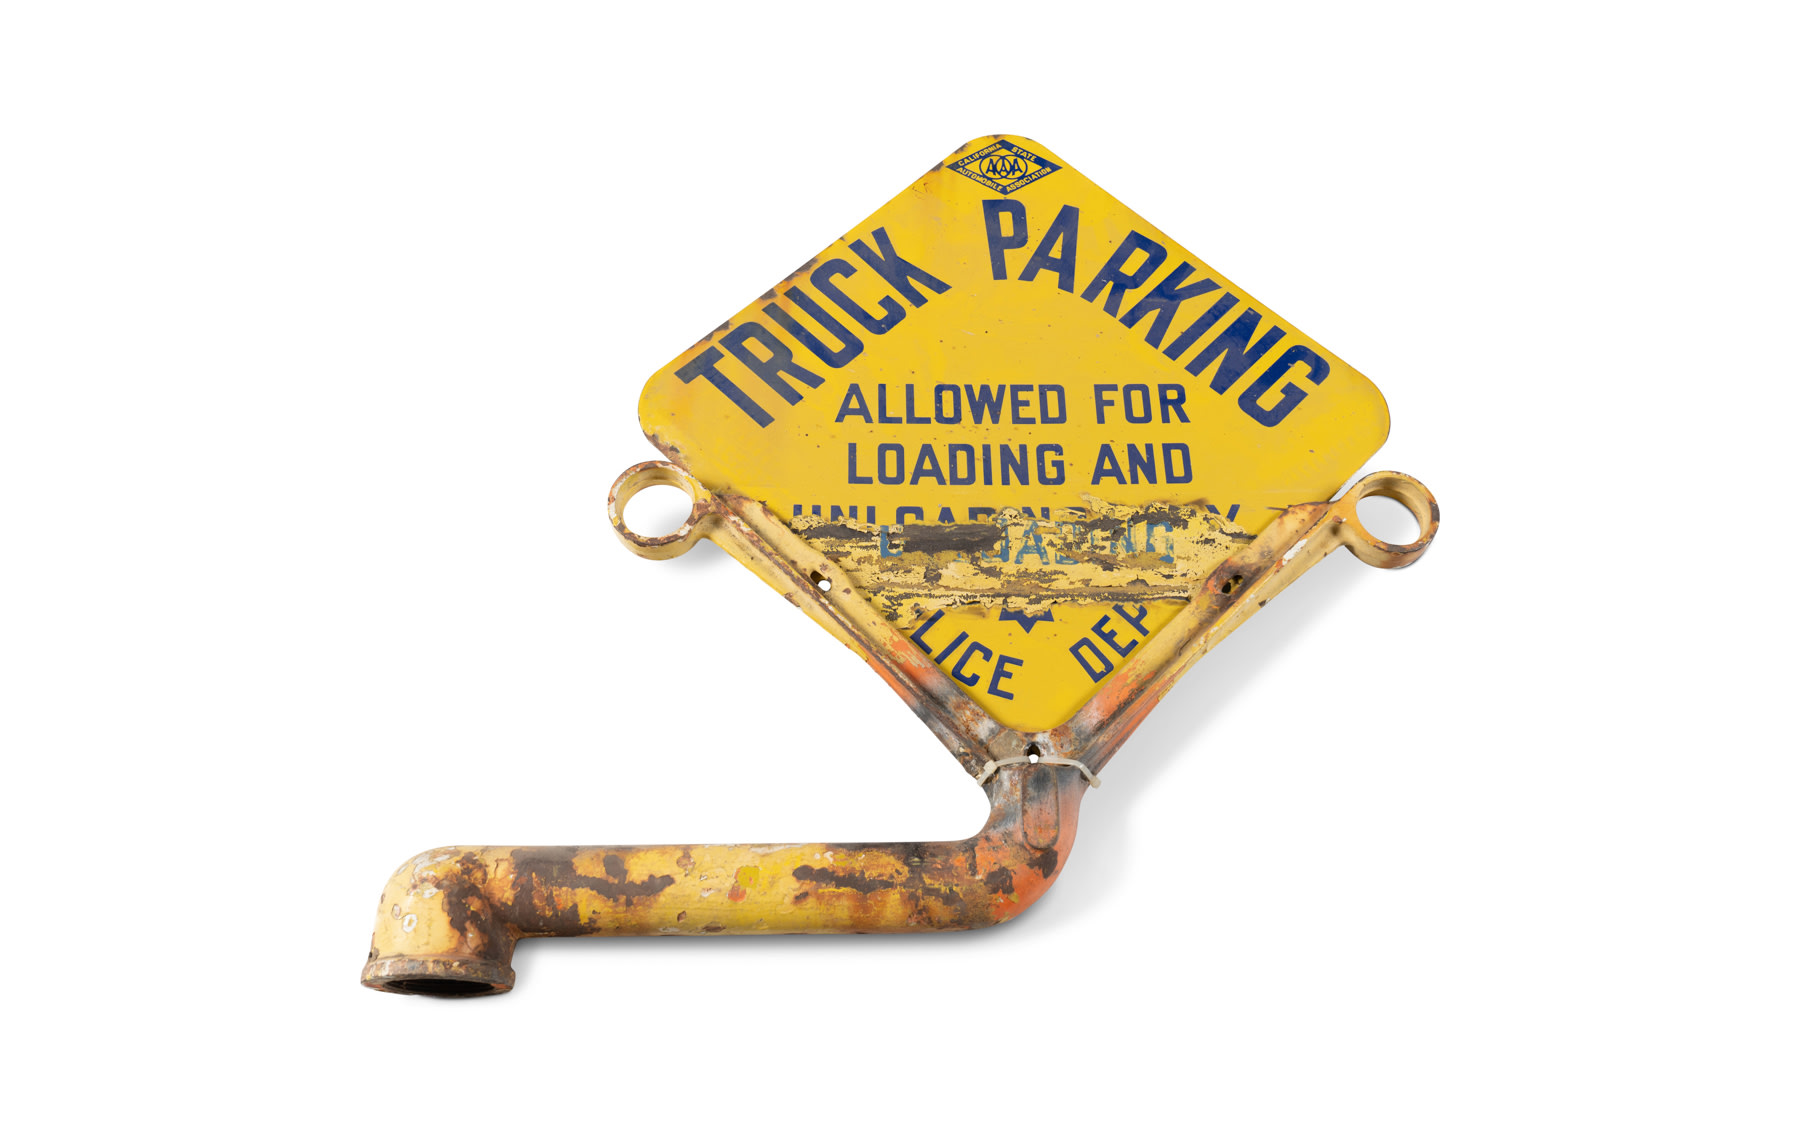 California State Auto Association Truck Parking Sign, c. 1920s